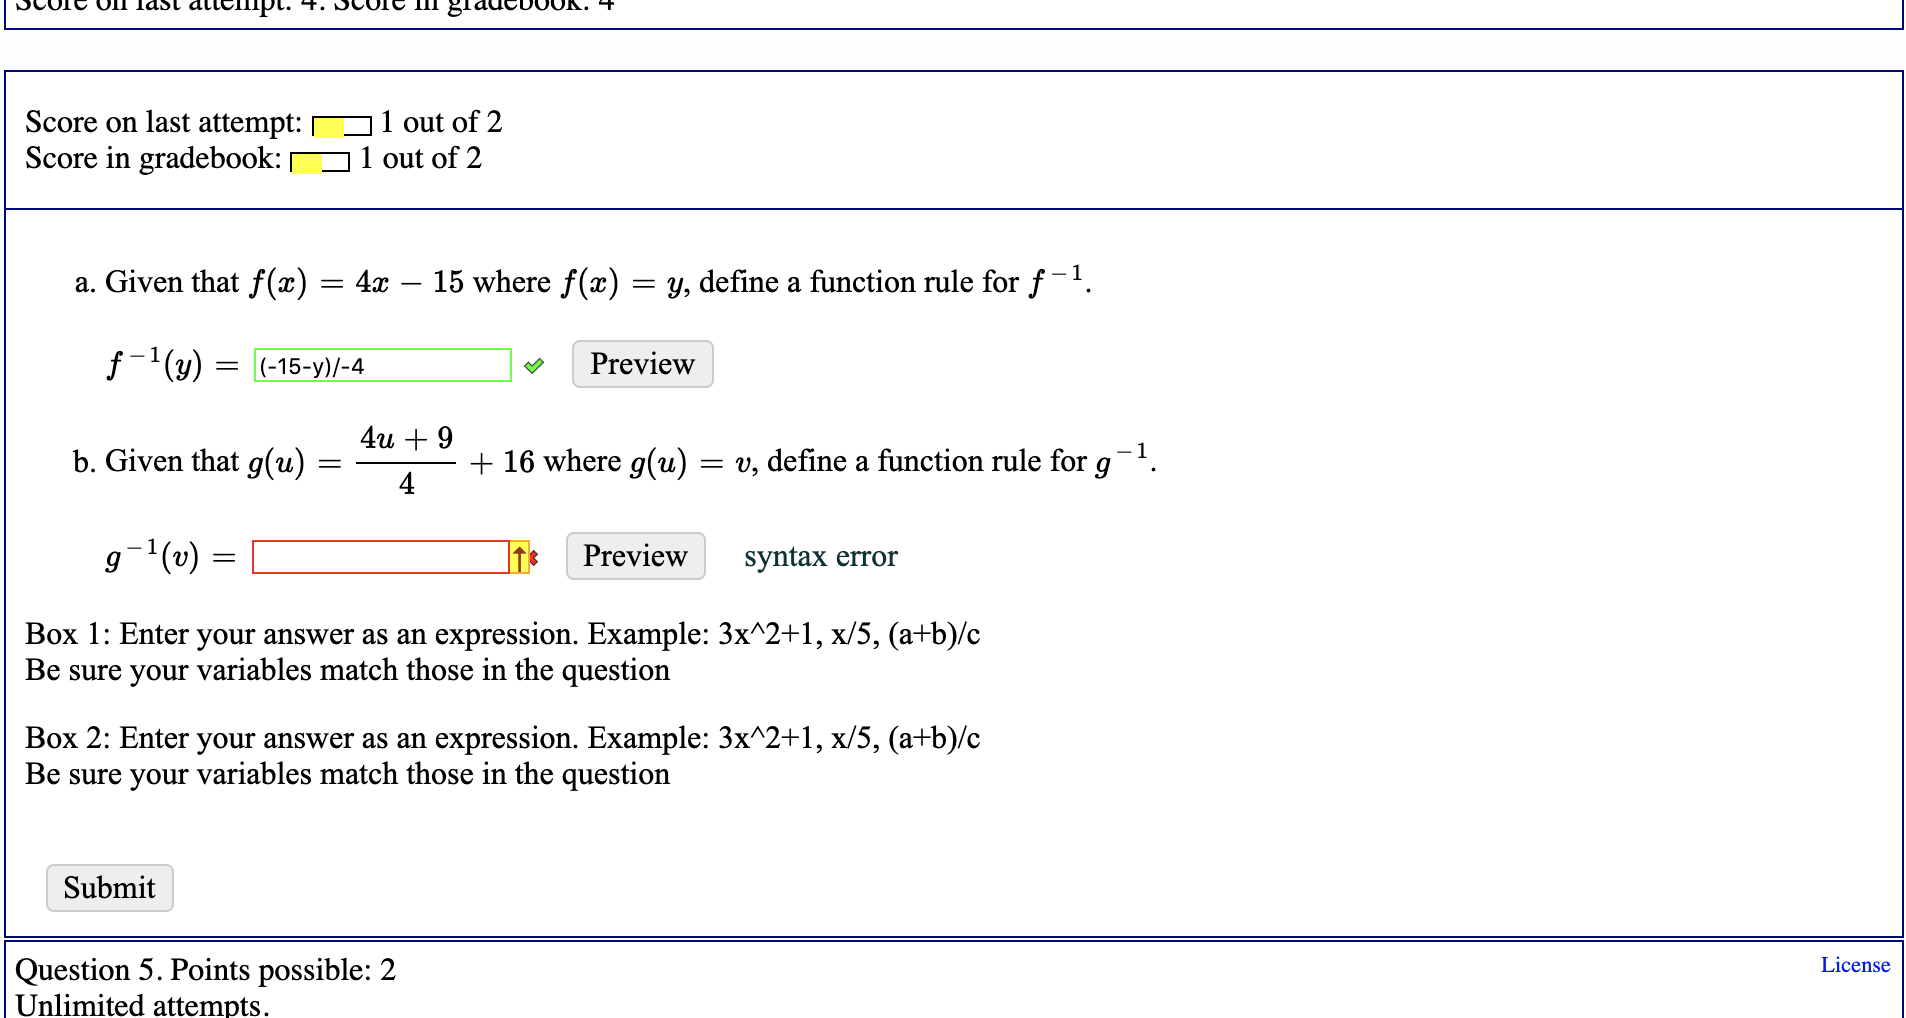 4и + 9
b. Given that g(u)
+ 16 where g(u) = v, define a function rule for g-1.
4
g-1(v) =
Preview
syntax error
